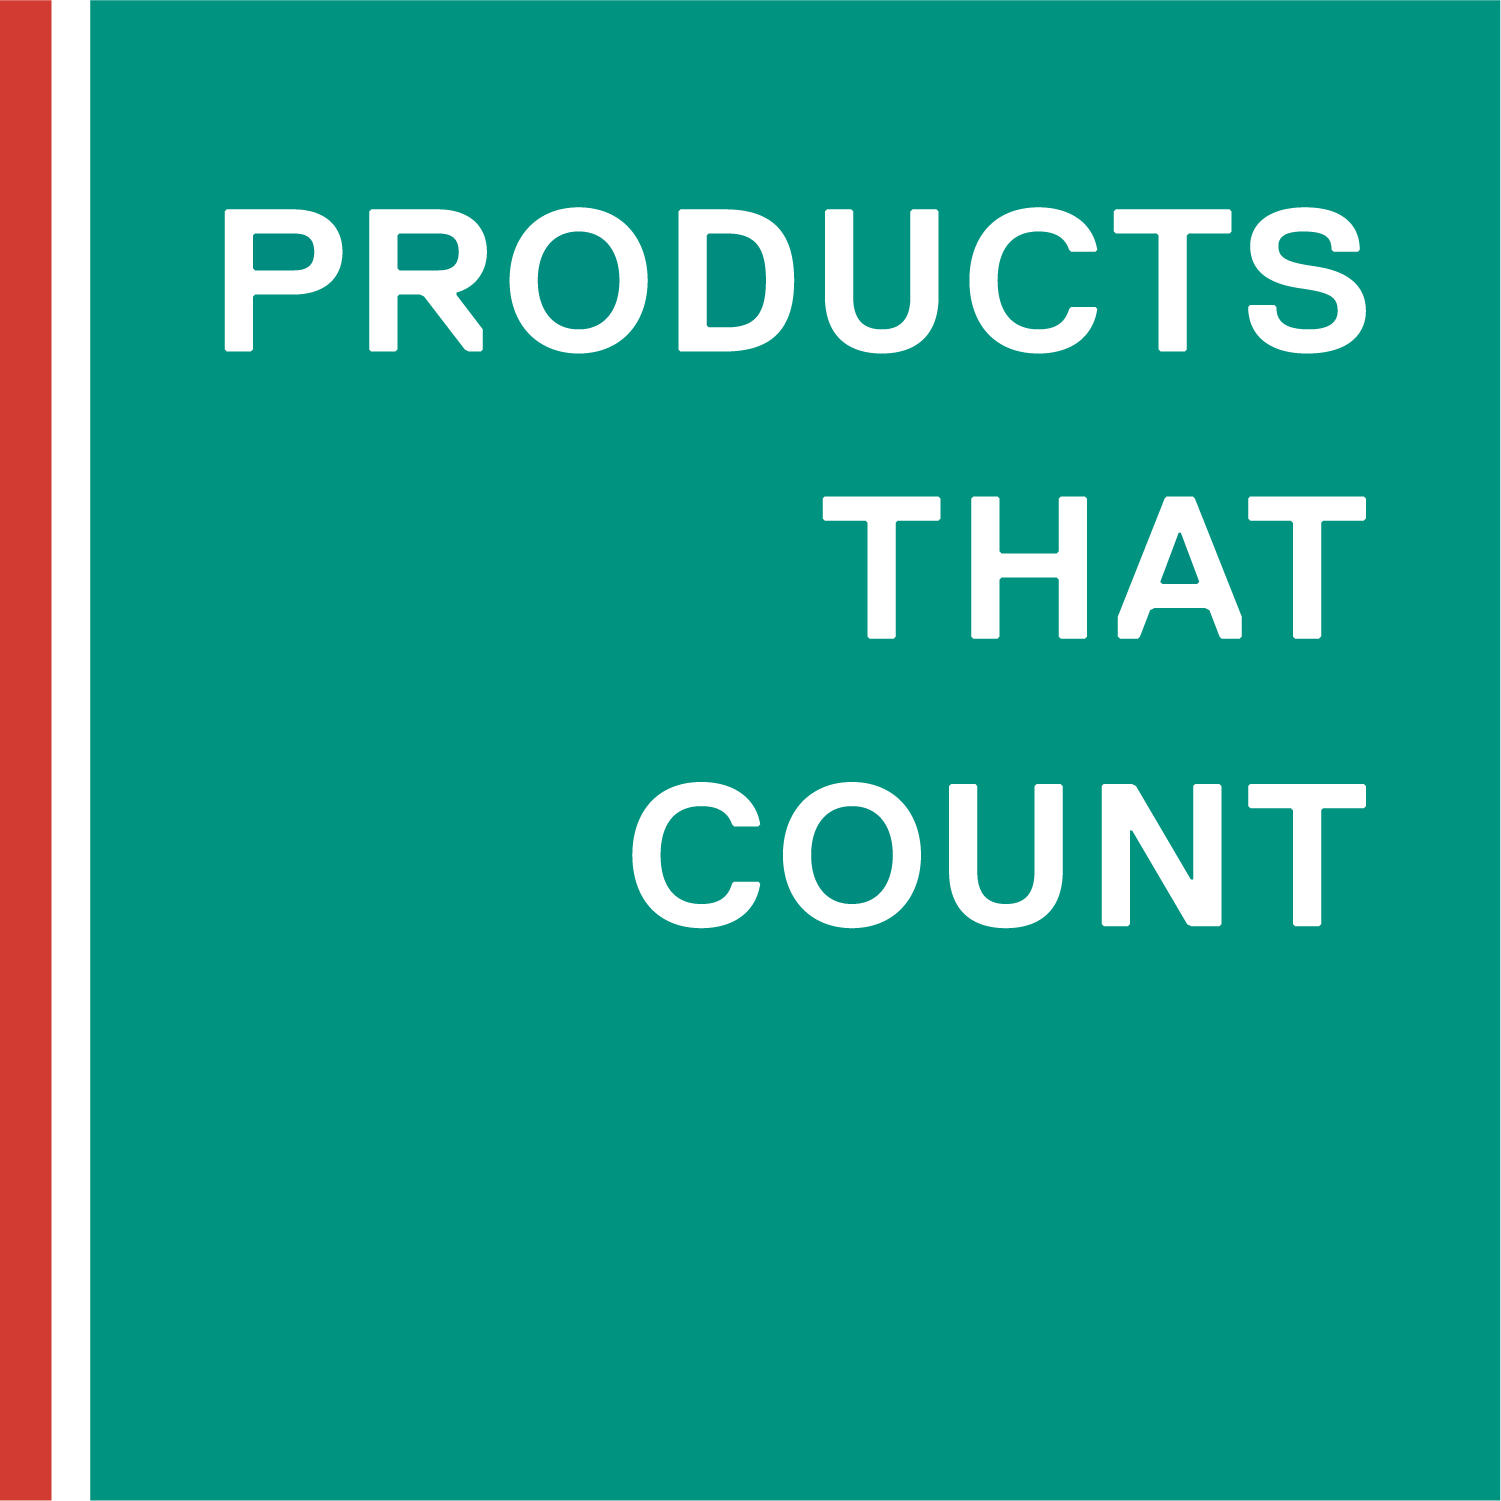 products that count logo